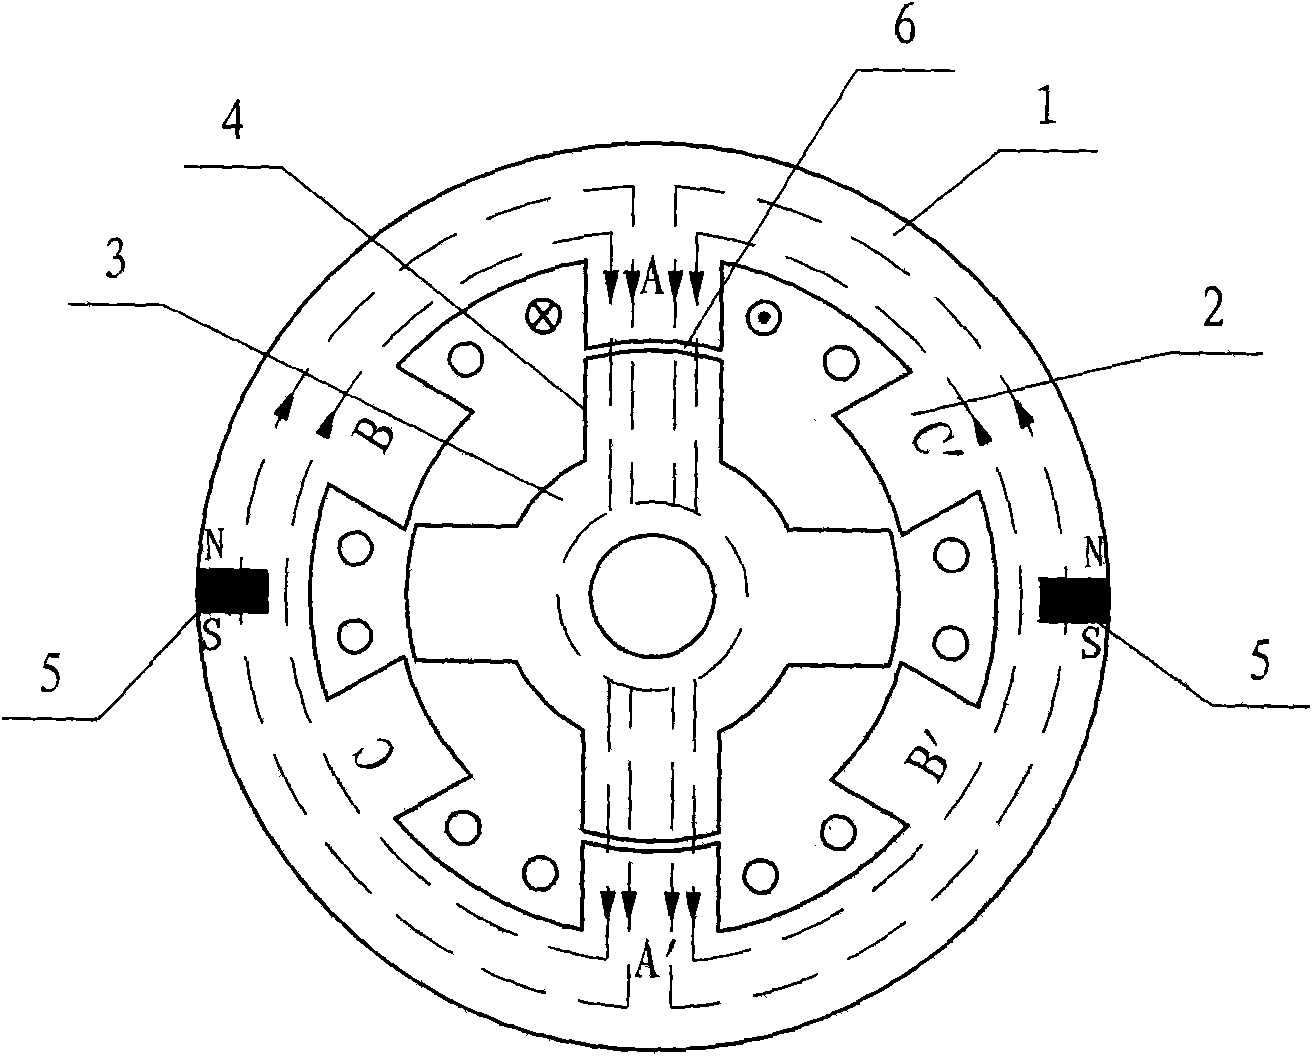 Switched reluctance motor with torque pulsation inhibited by permanent magnetic flux